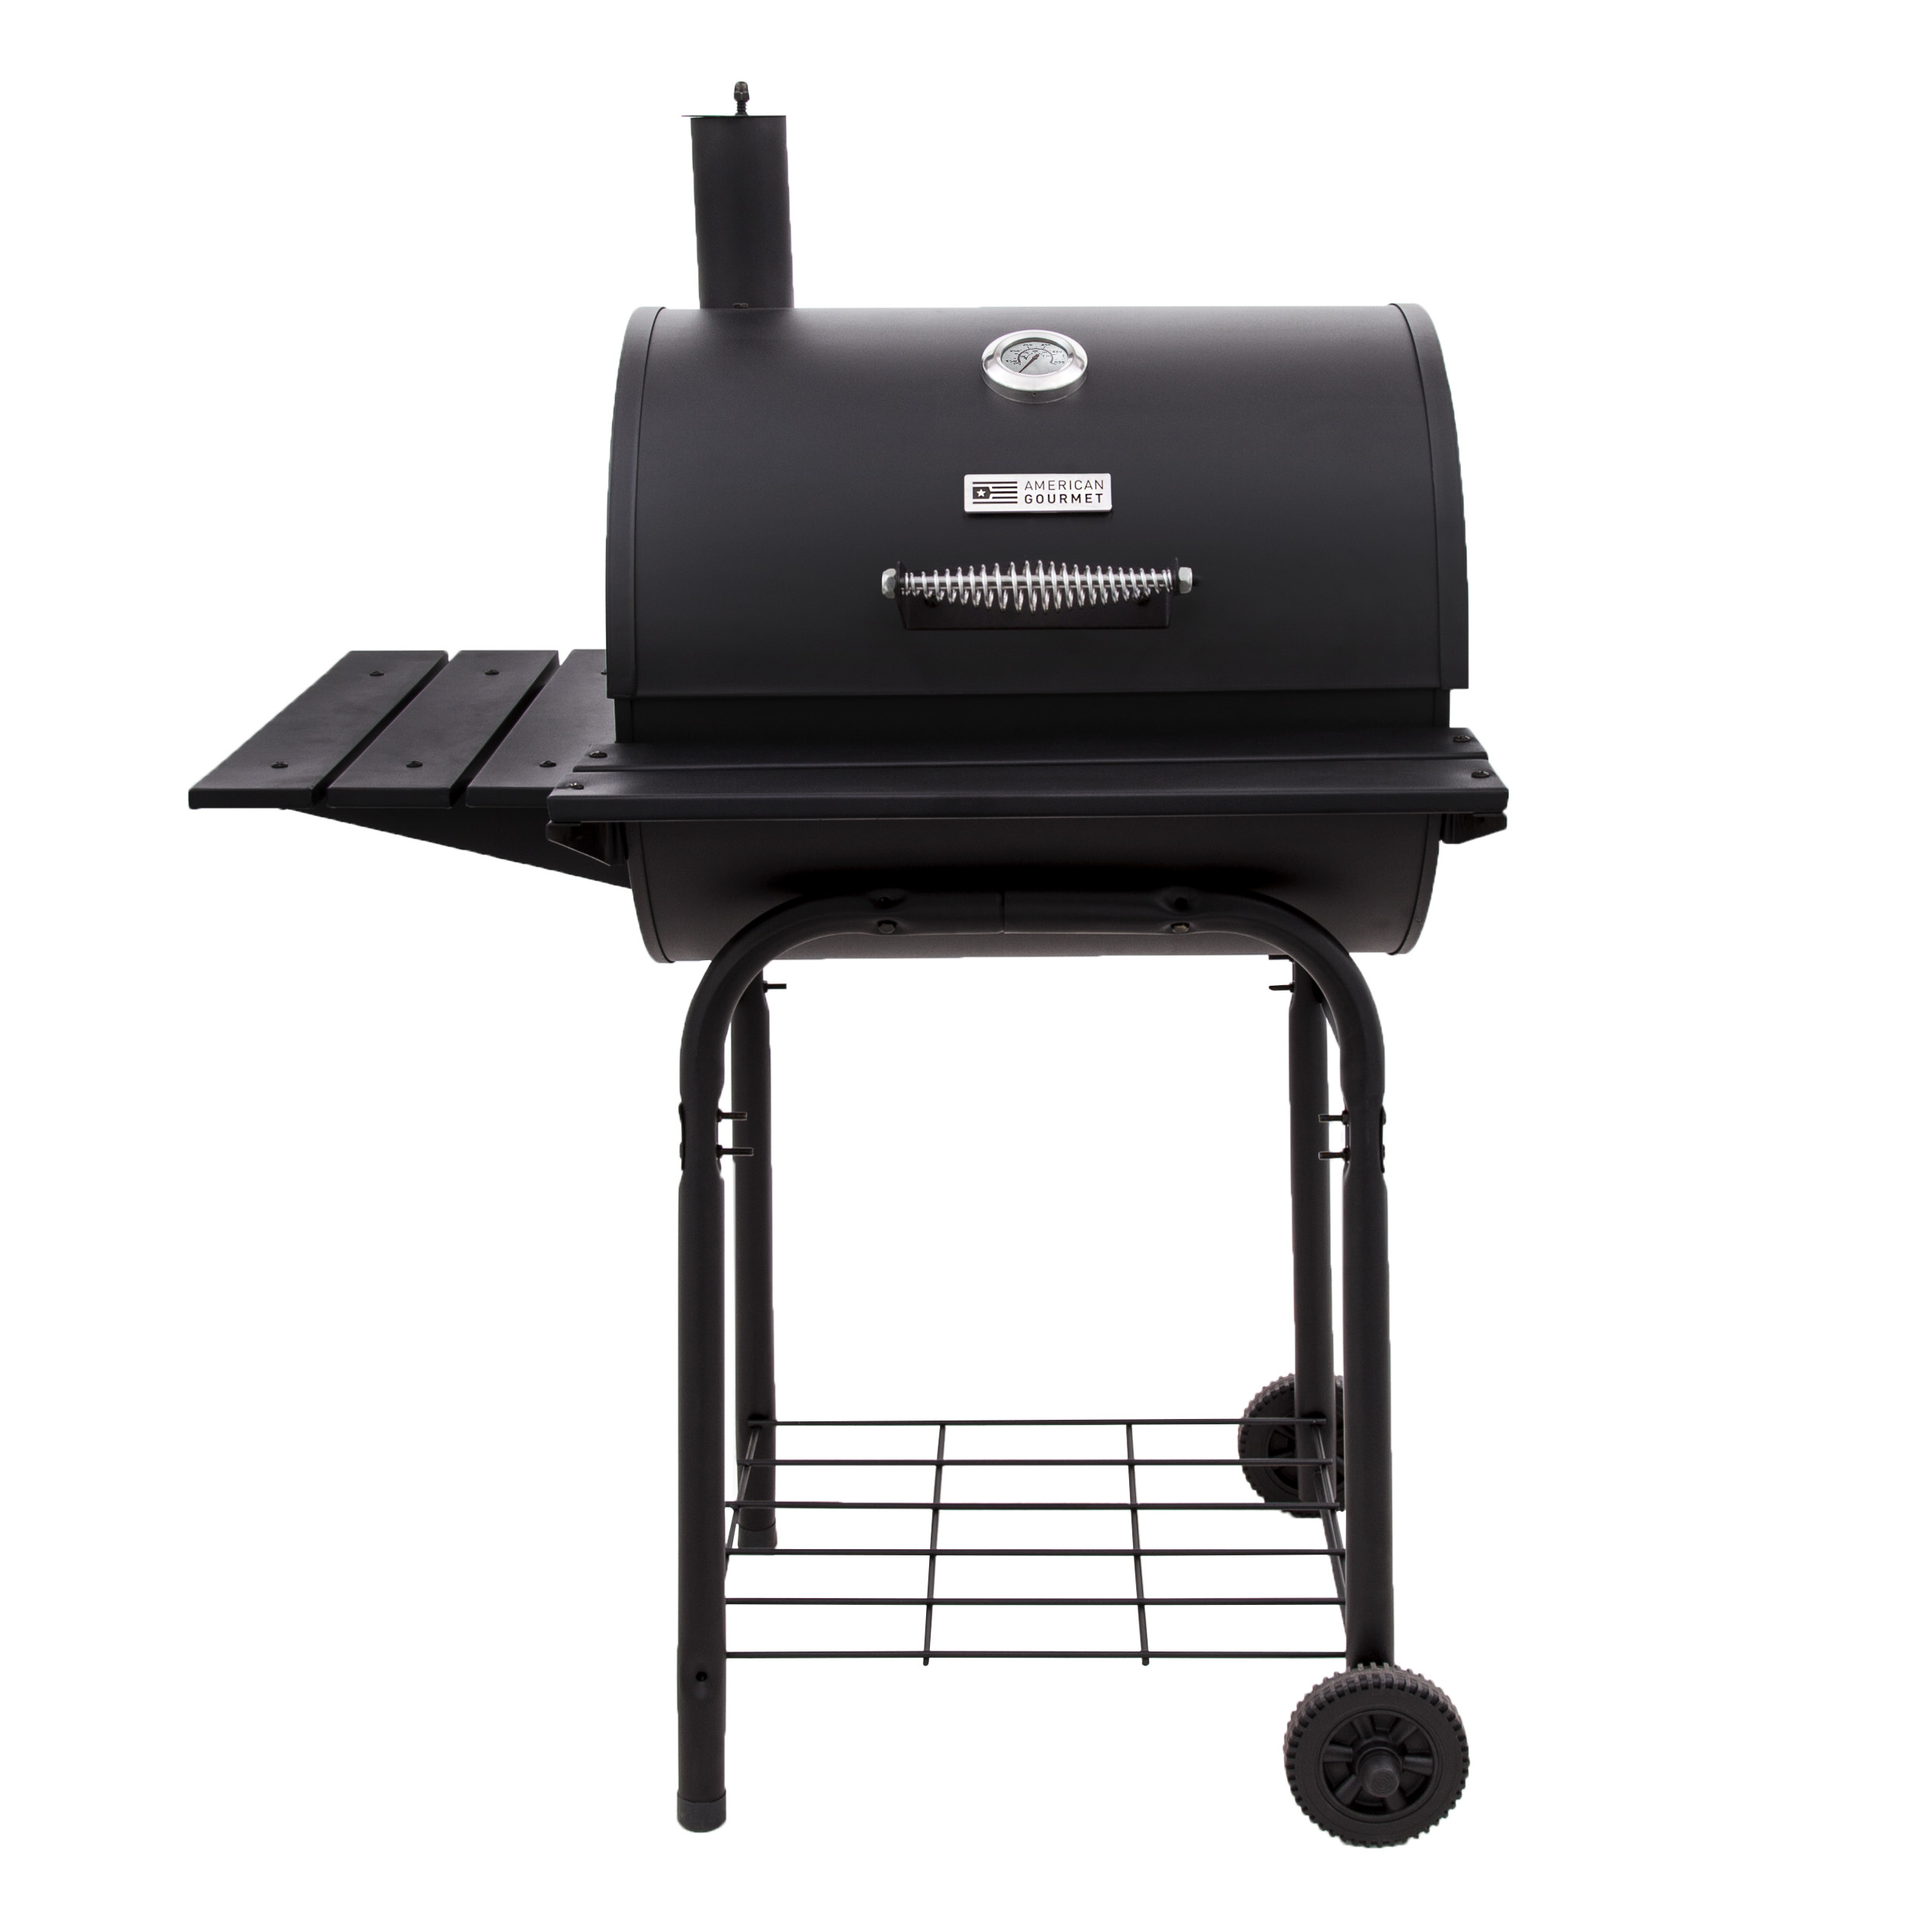 American Gourmet by Char-Broil 625 sq in Charcoal Barrel Outdoor Grill - image 1 of 6